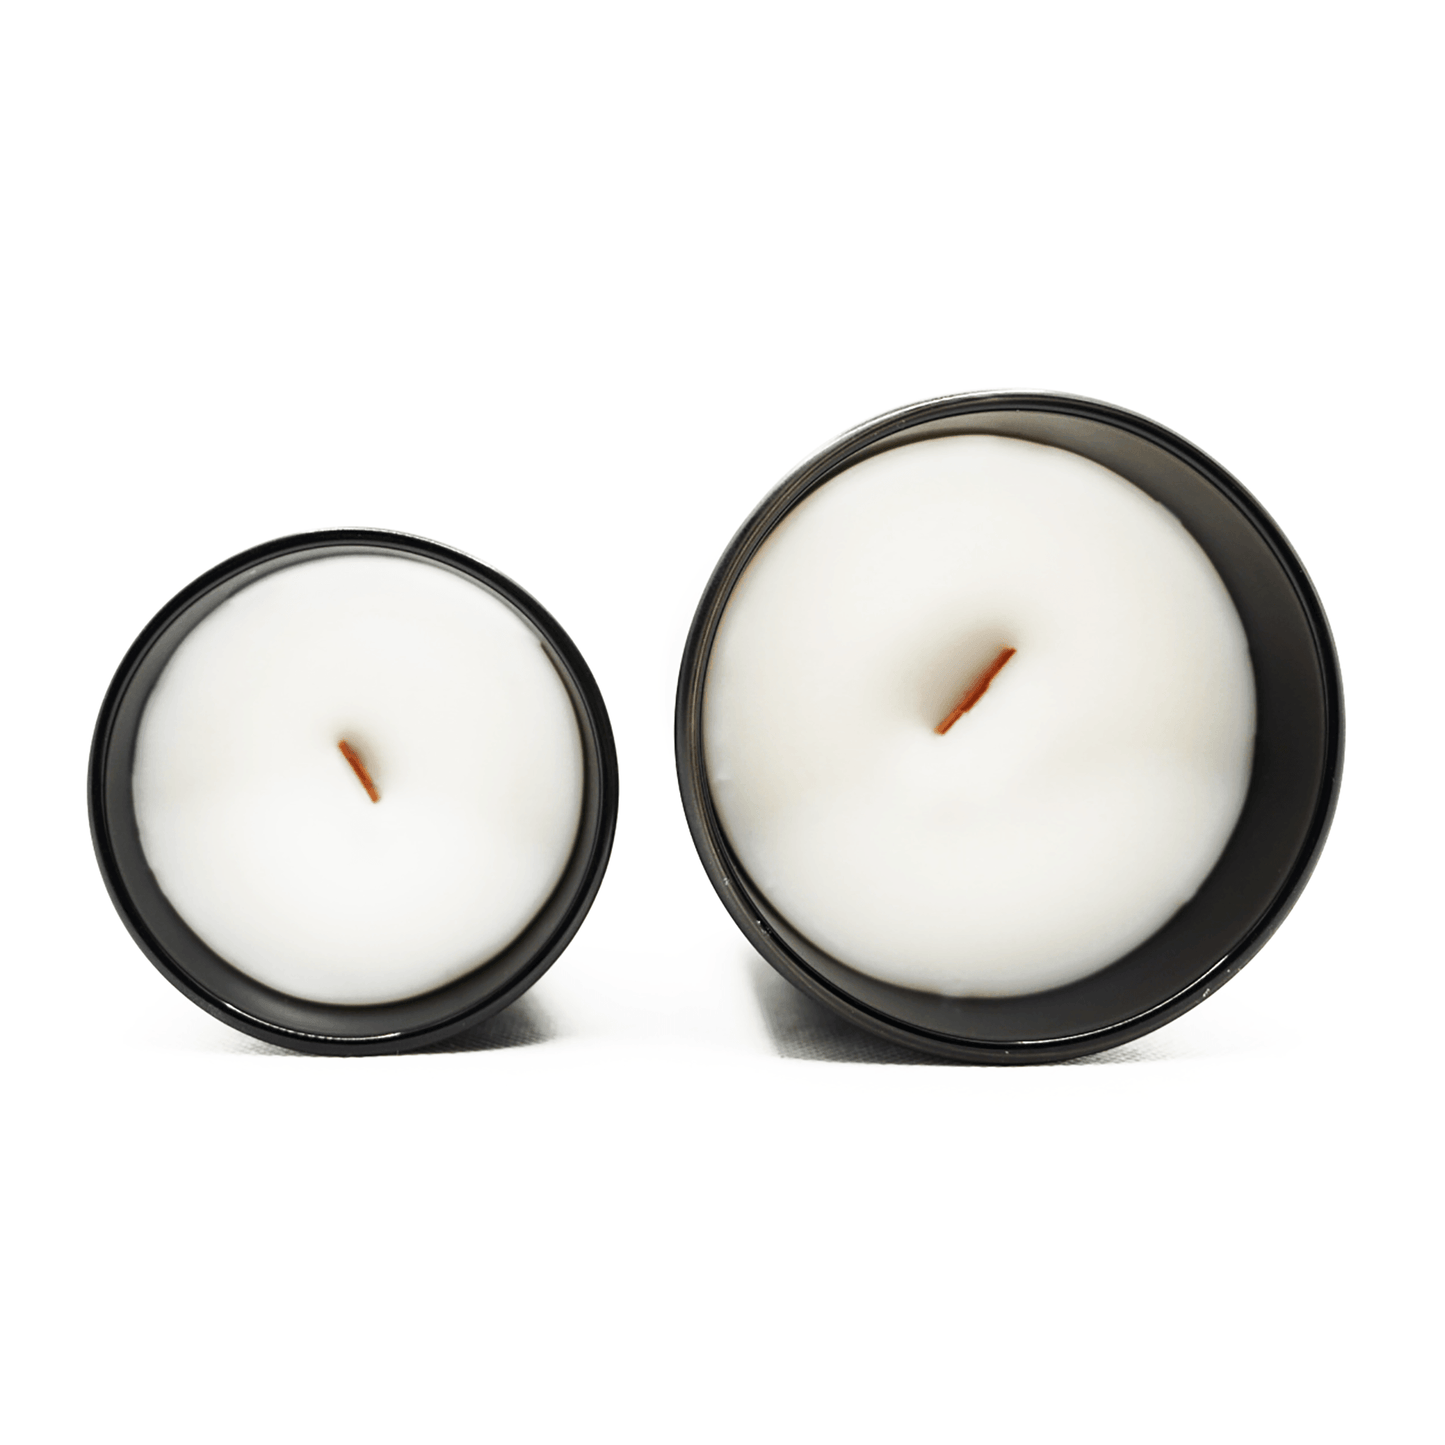 Spank Me - Woodwick Candle - BADWAX